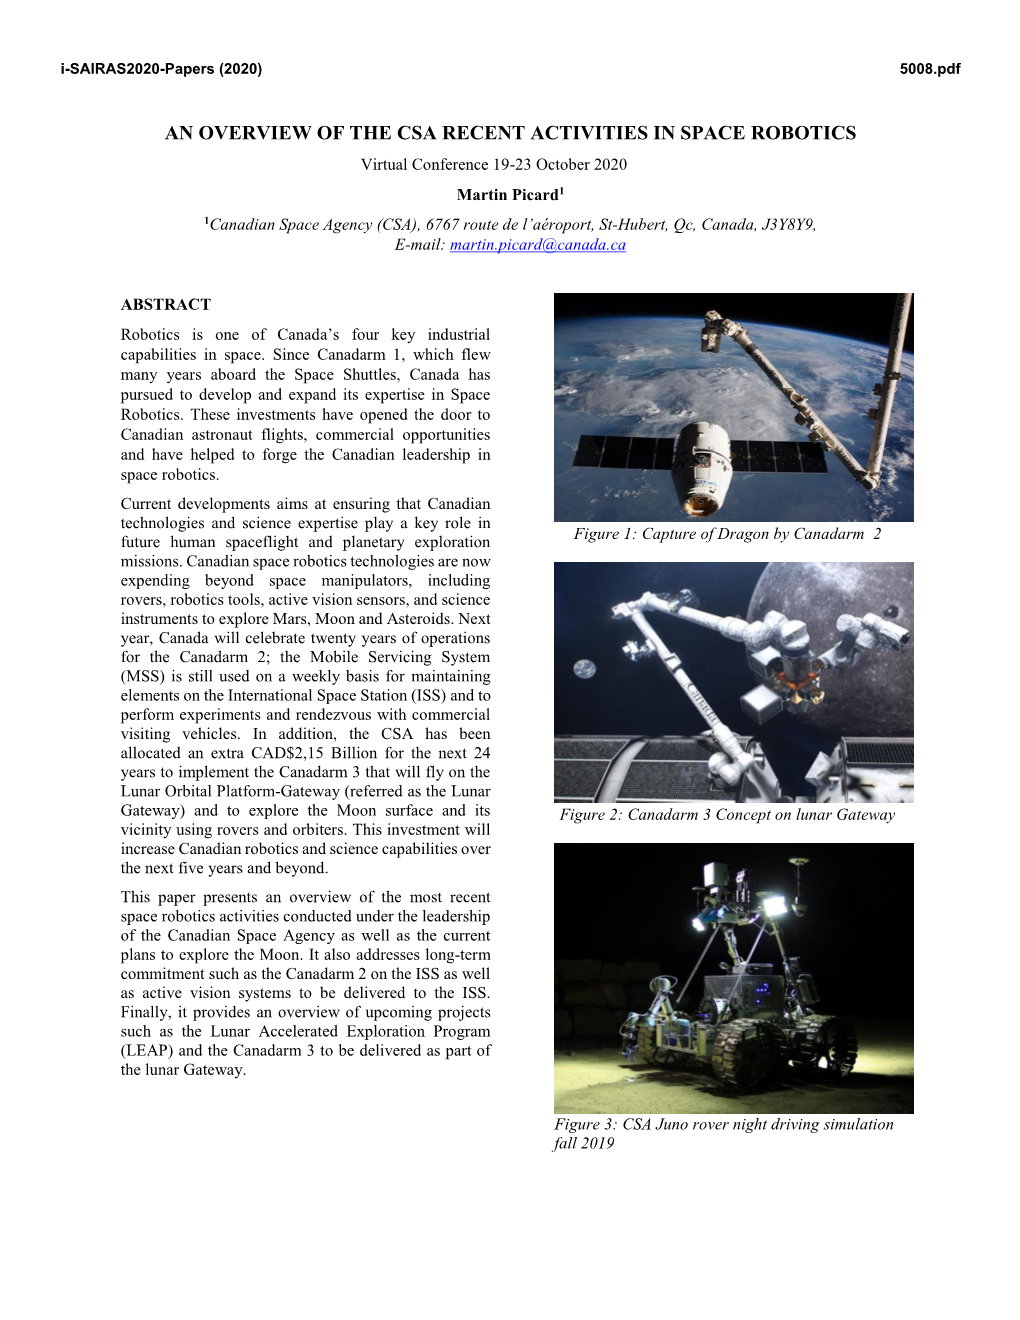 An Overview of the Csa Recent Activities in Space